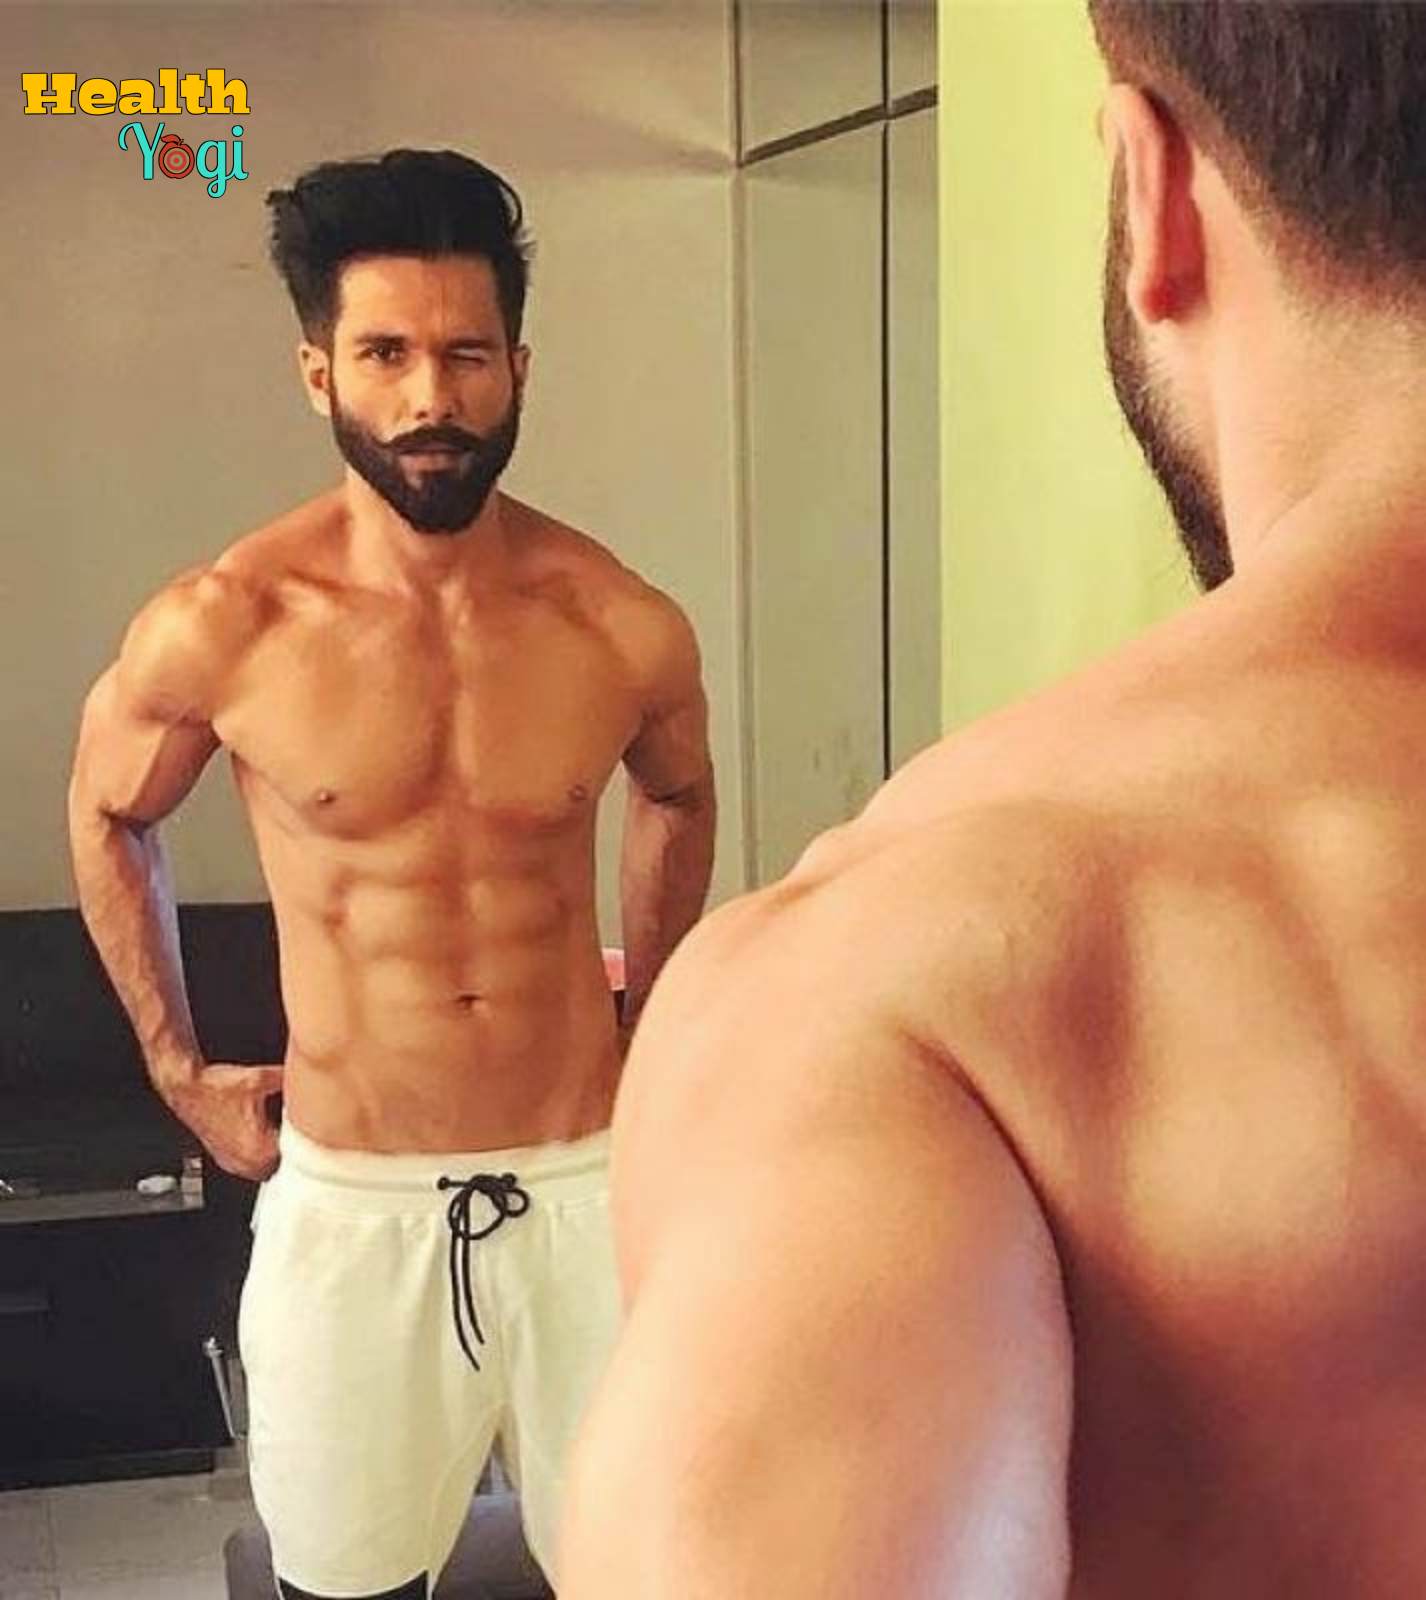 Shahid kapoor fitness regime, diet plan and workout routine